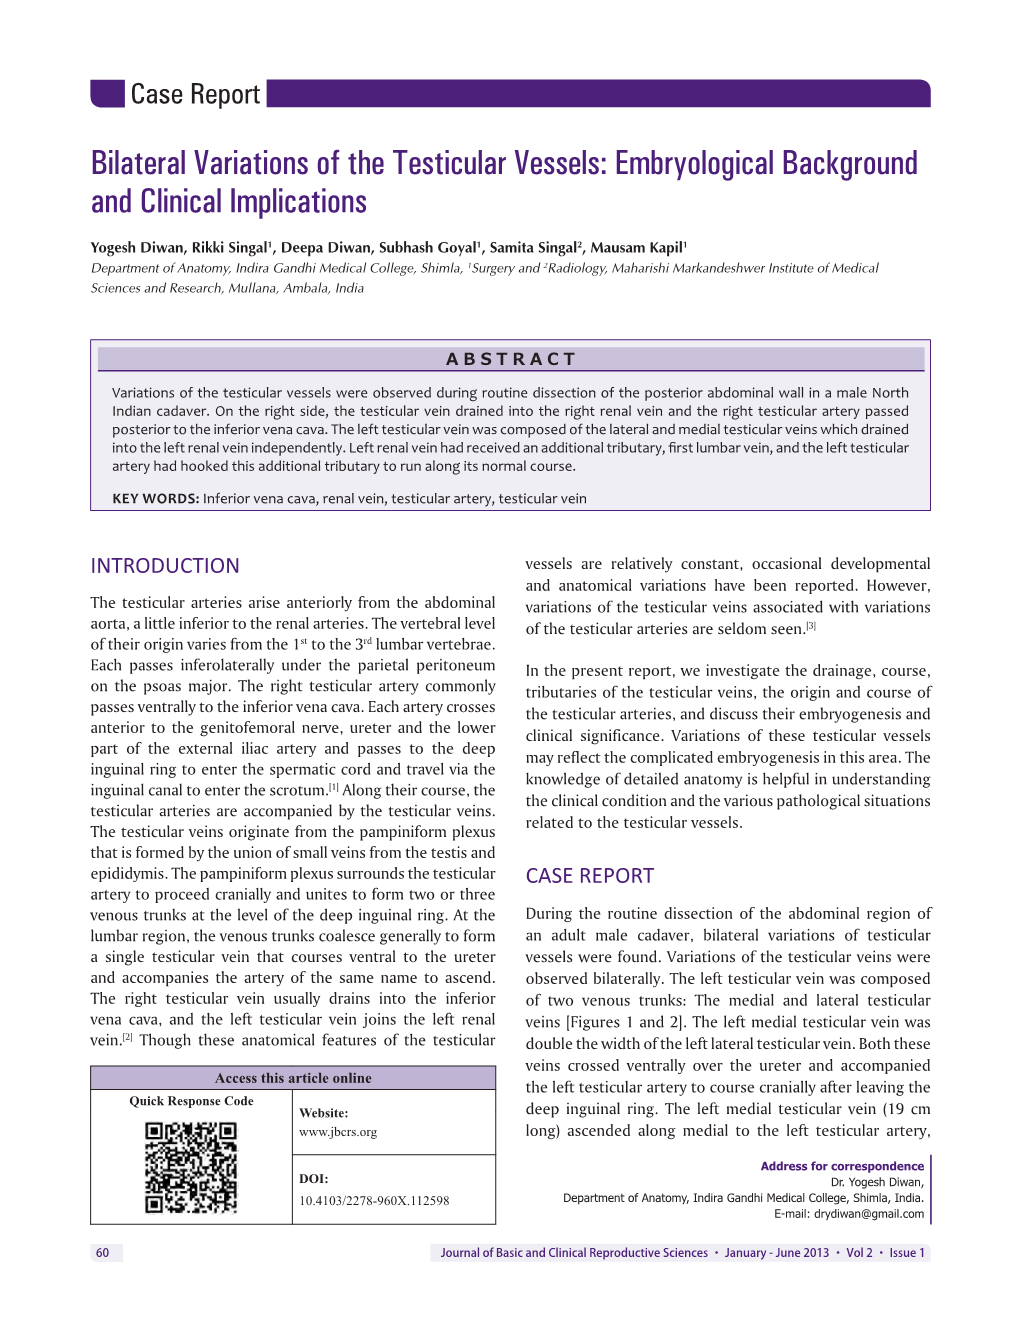 Bilateral Variations of the Testicular Vessels: Embryological Background and Clinical Implications